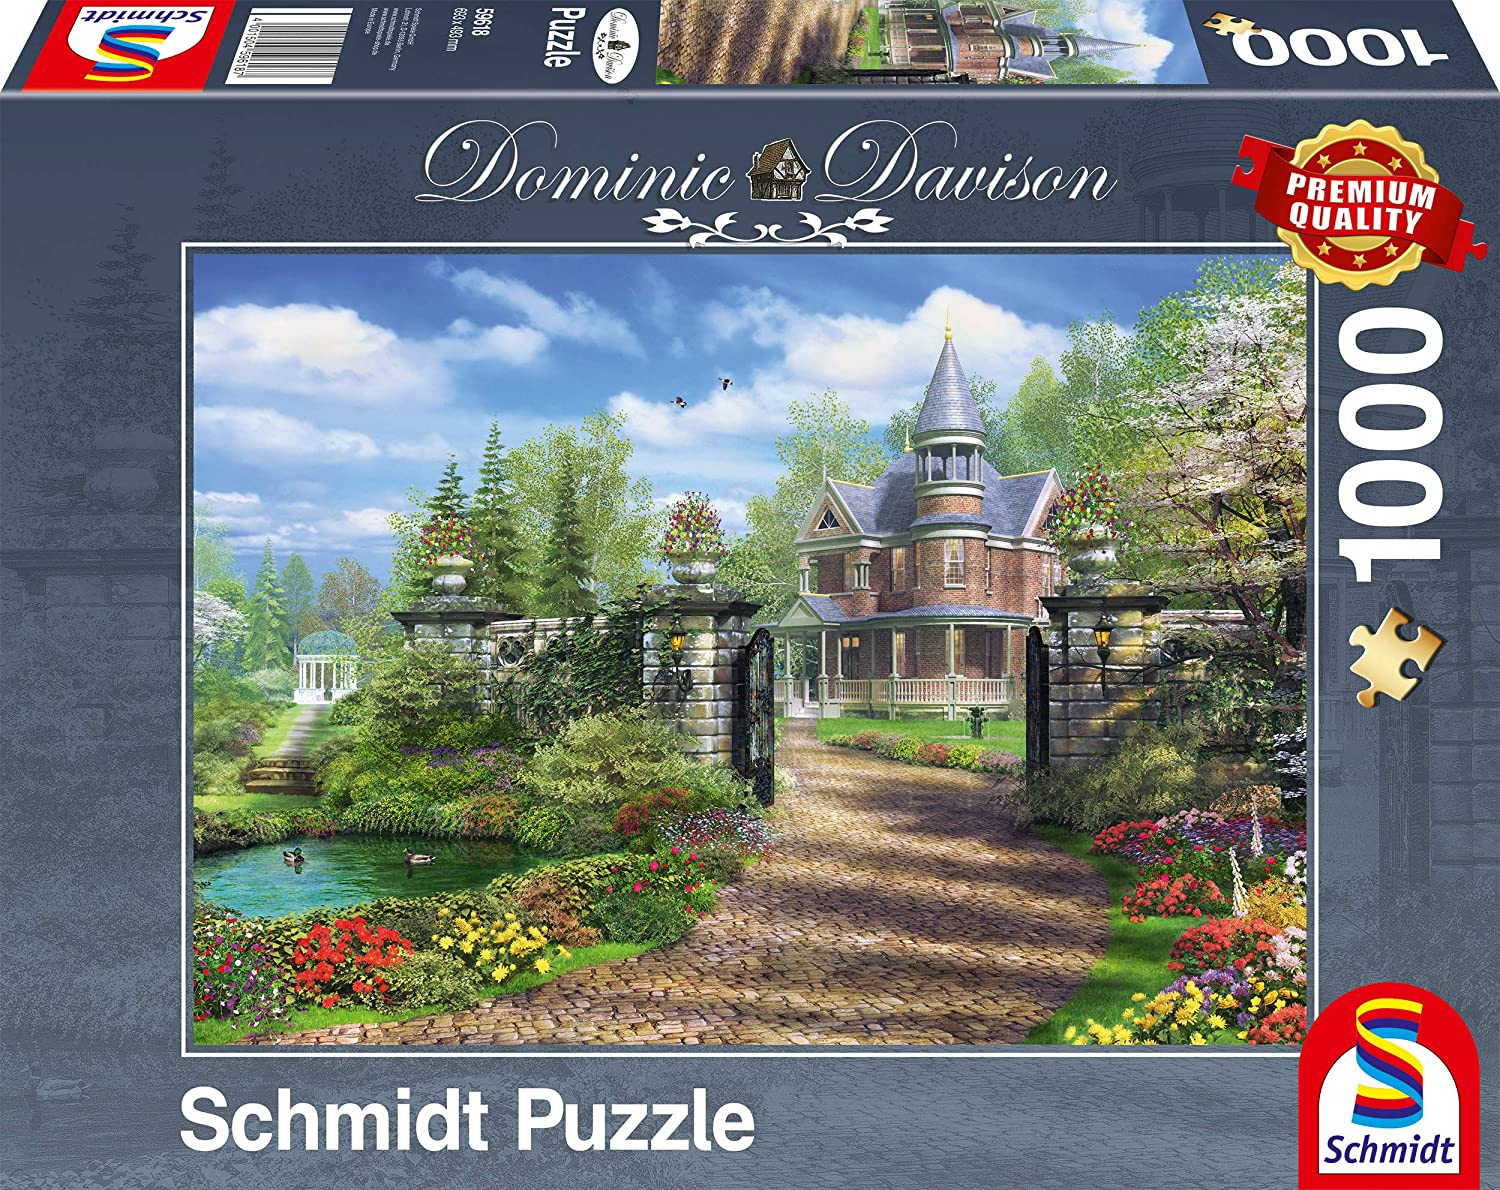 Schmidt Manor House with Tower by Dominic Davison 1000 piece jigsaw 59617 NEW 